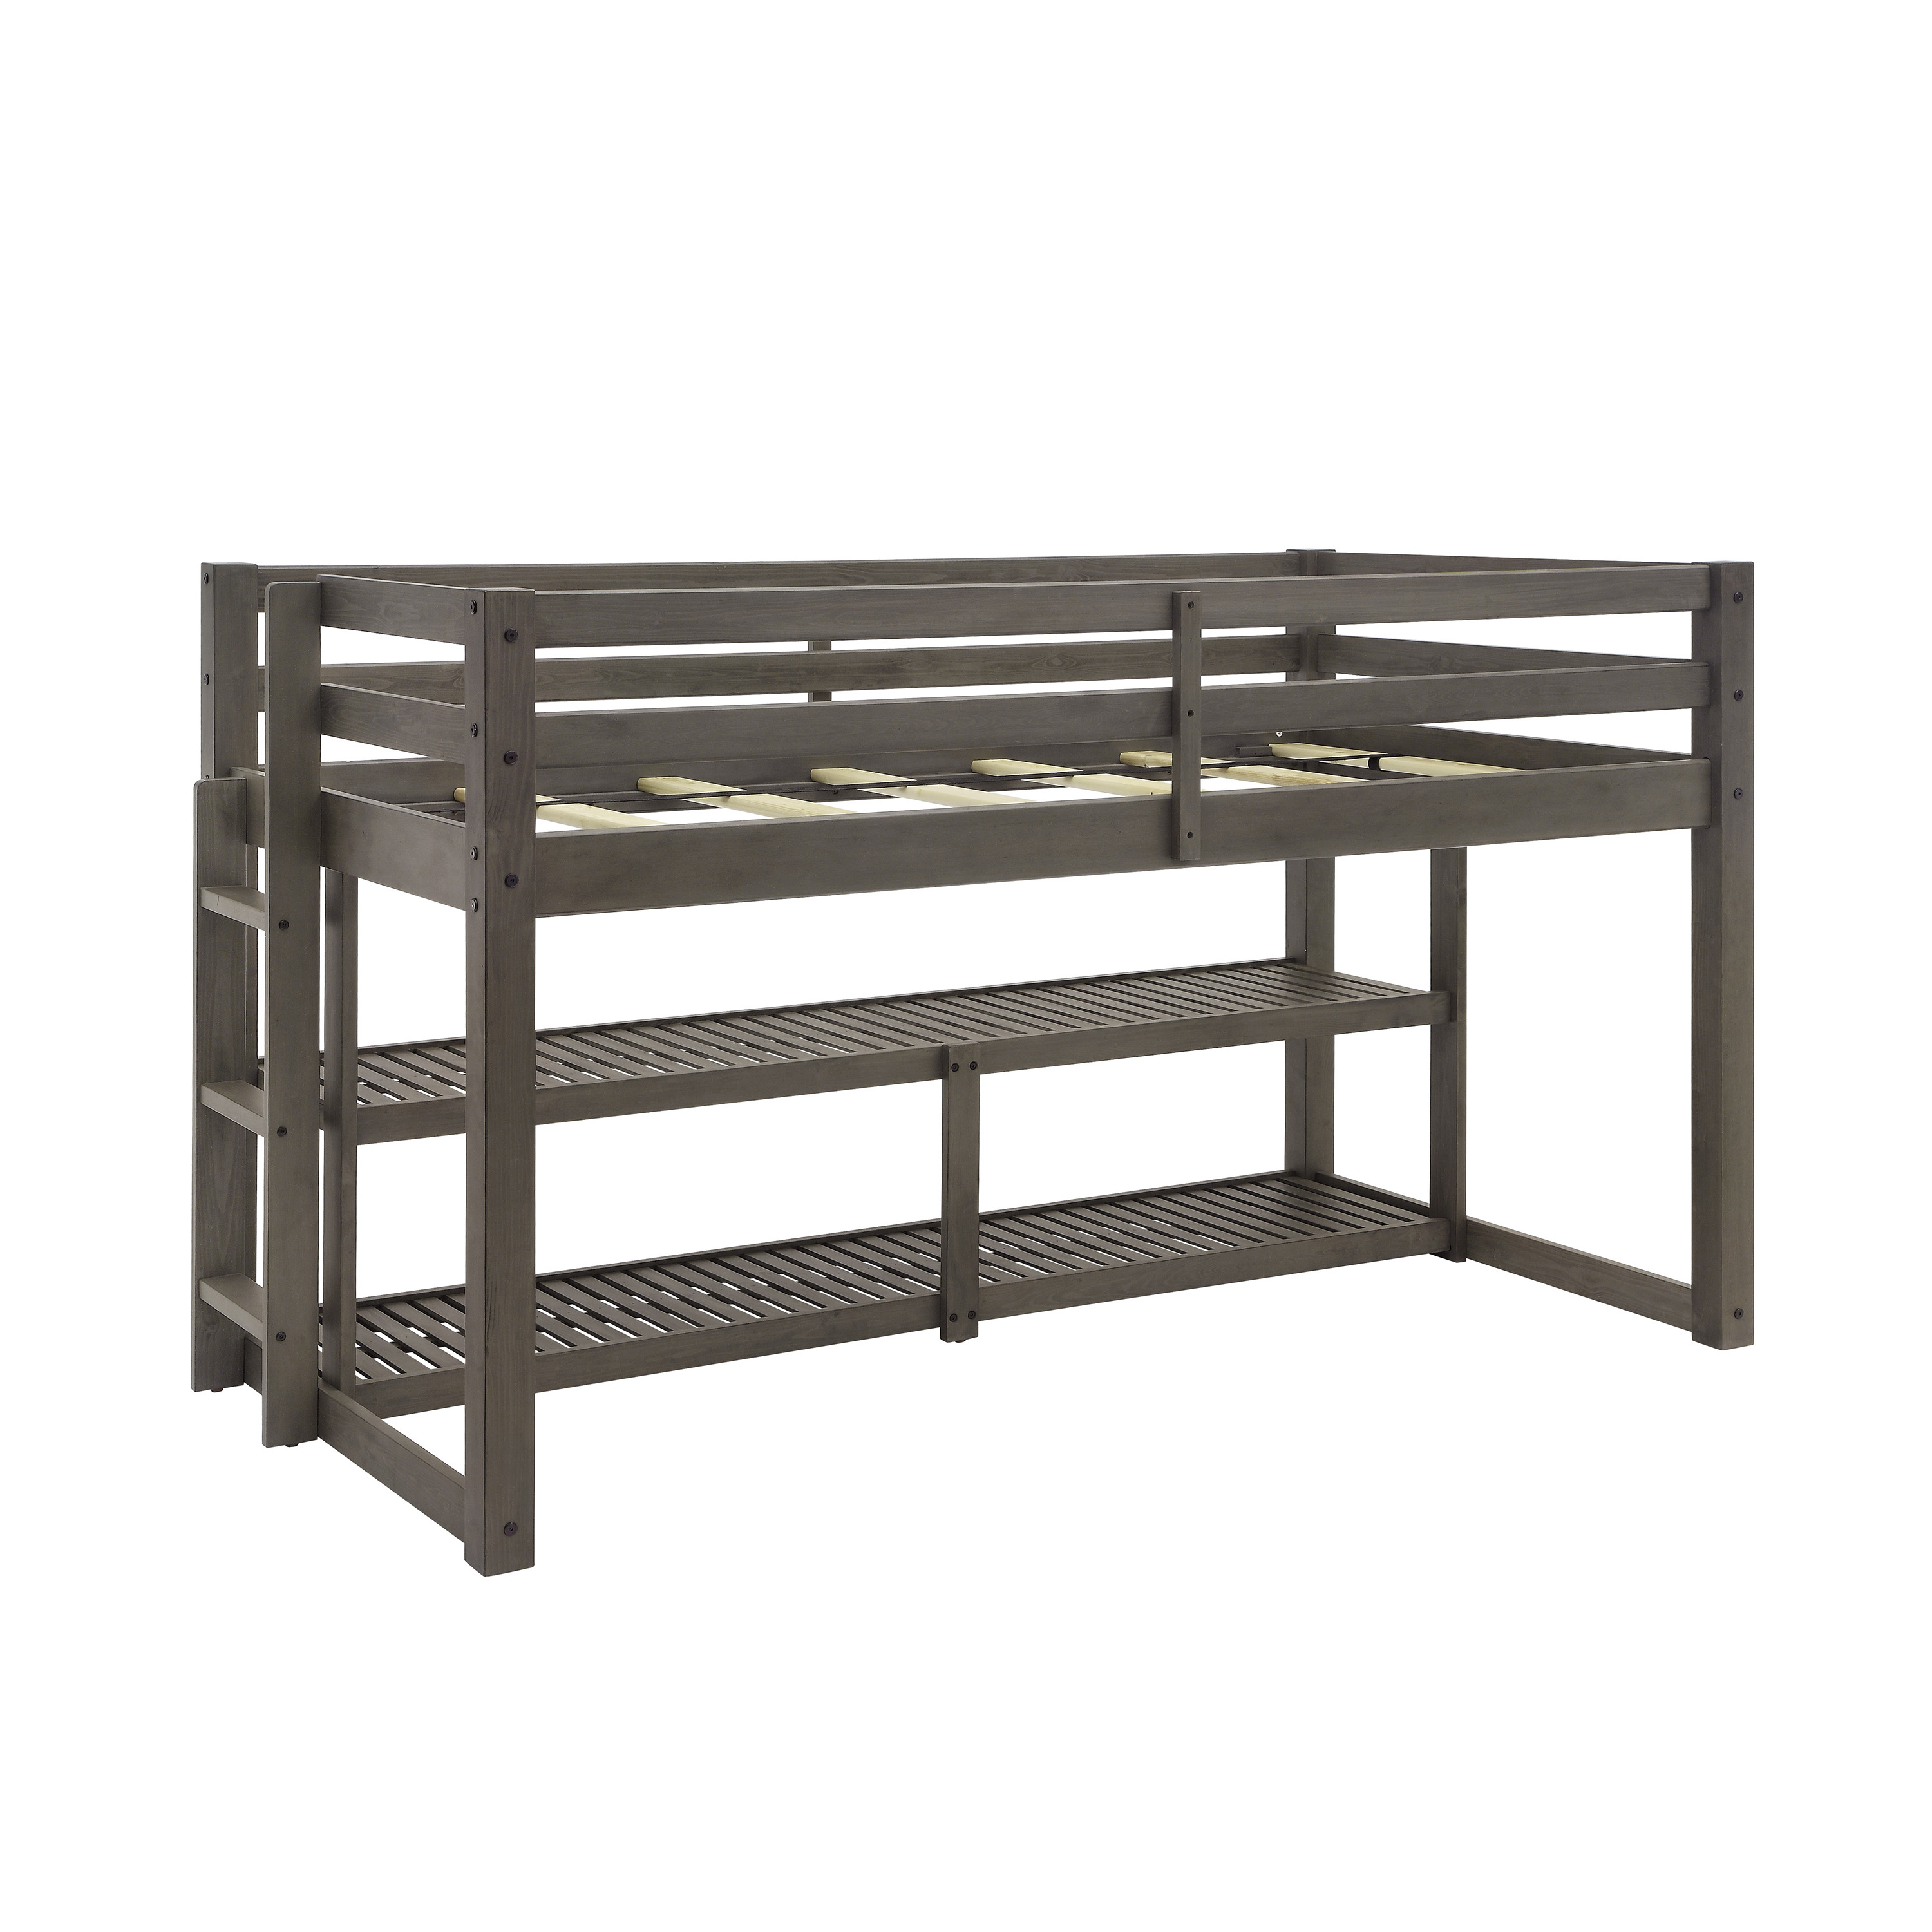 Better Homes and Gardens Greer Twin Loft Storage Bed, Gray - image 10 of 11